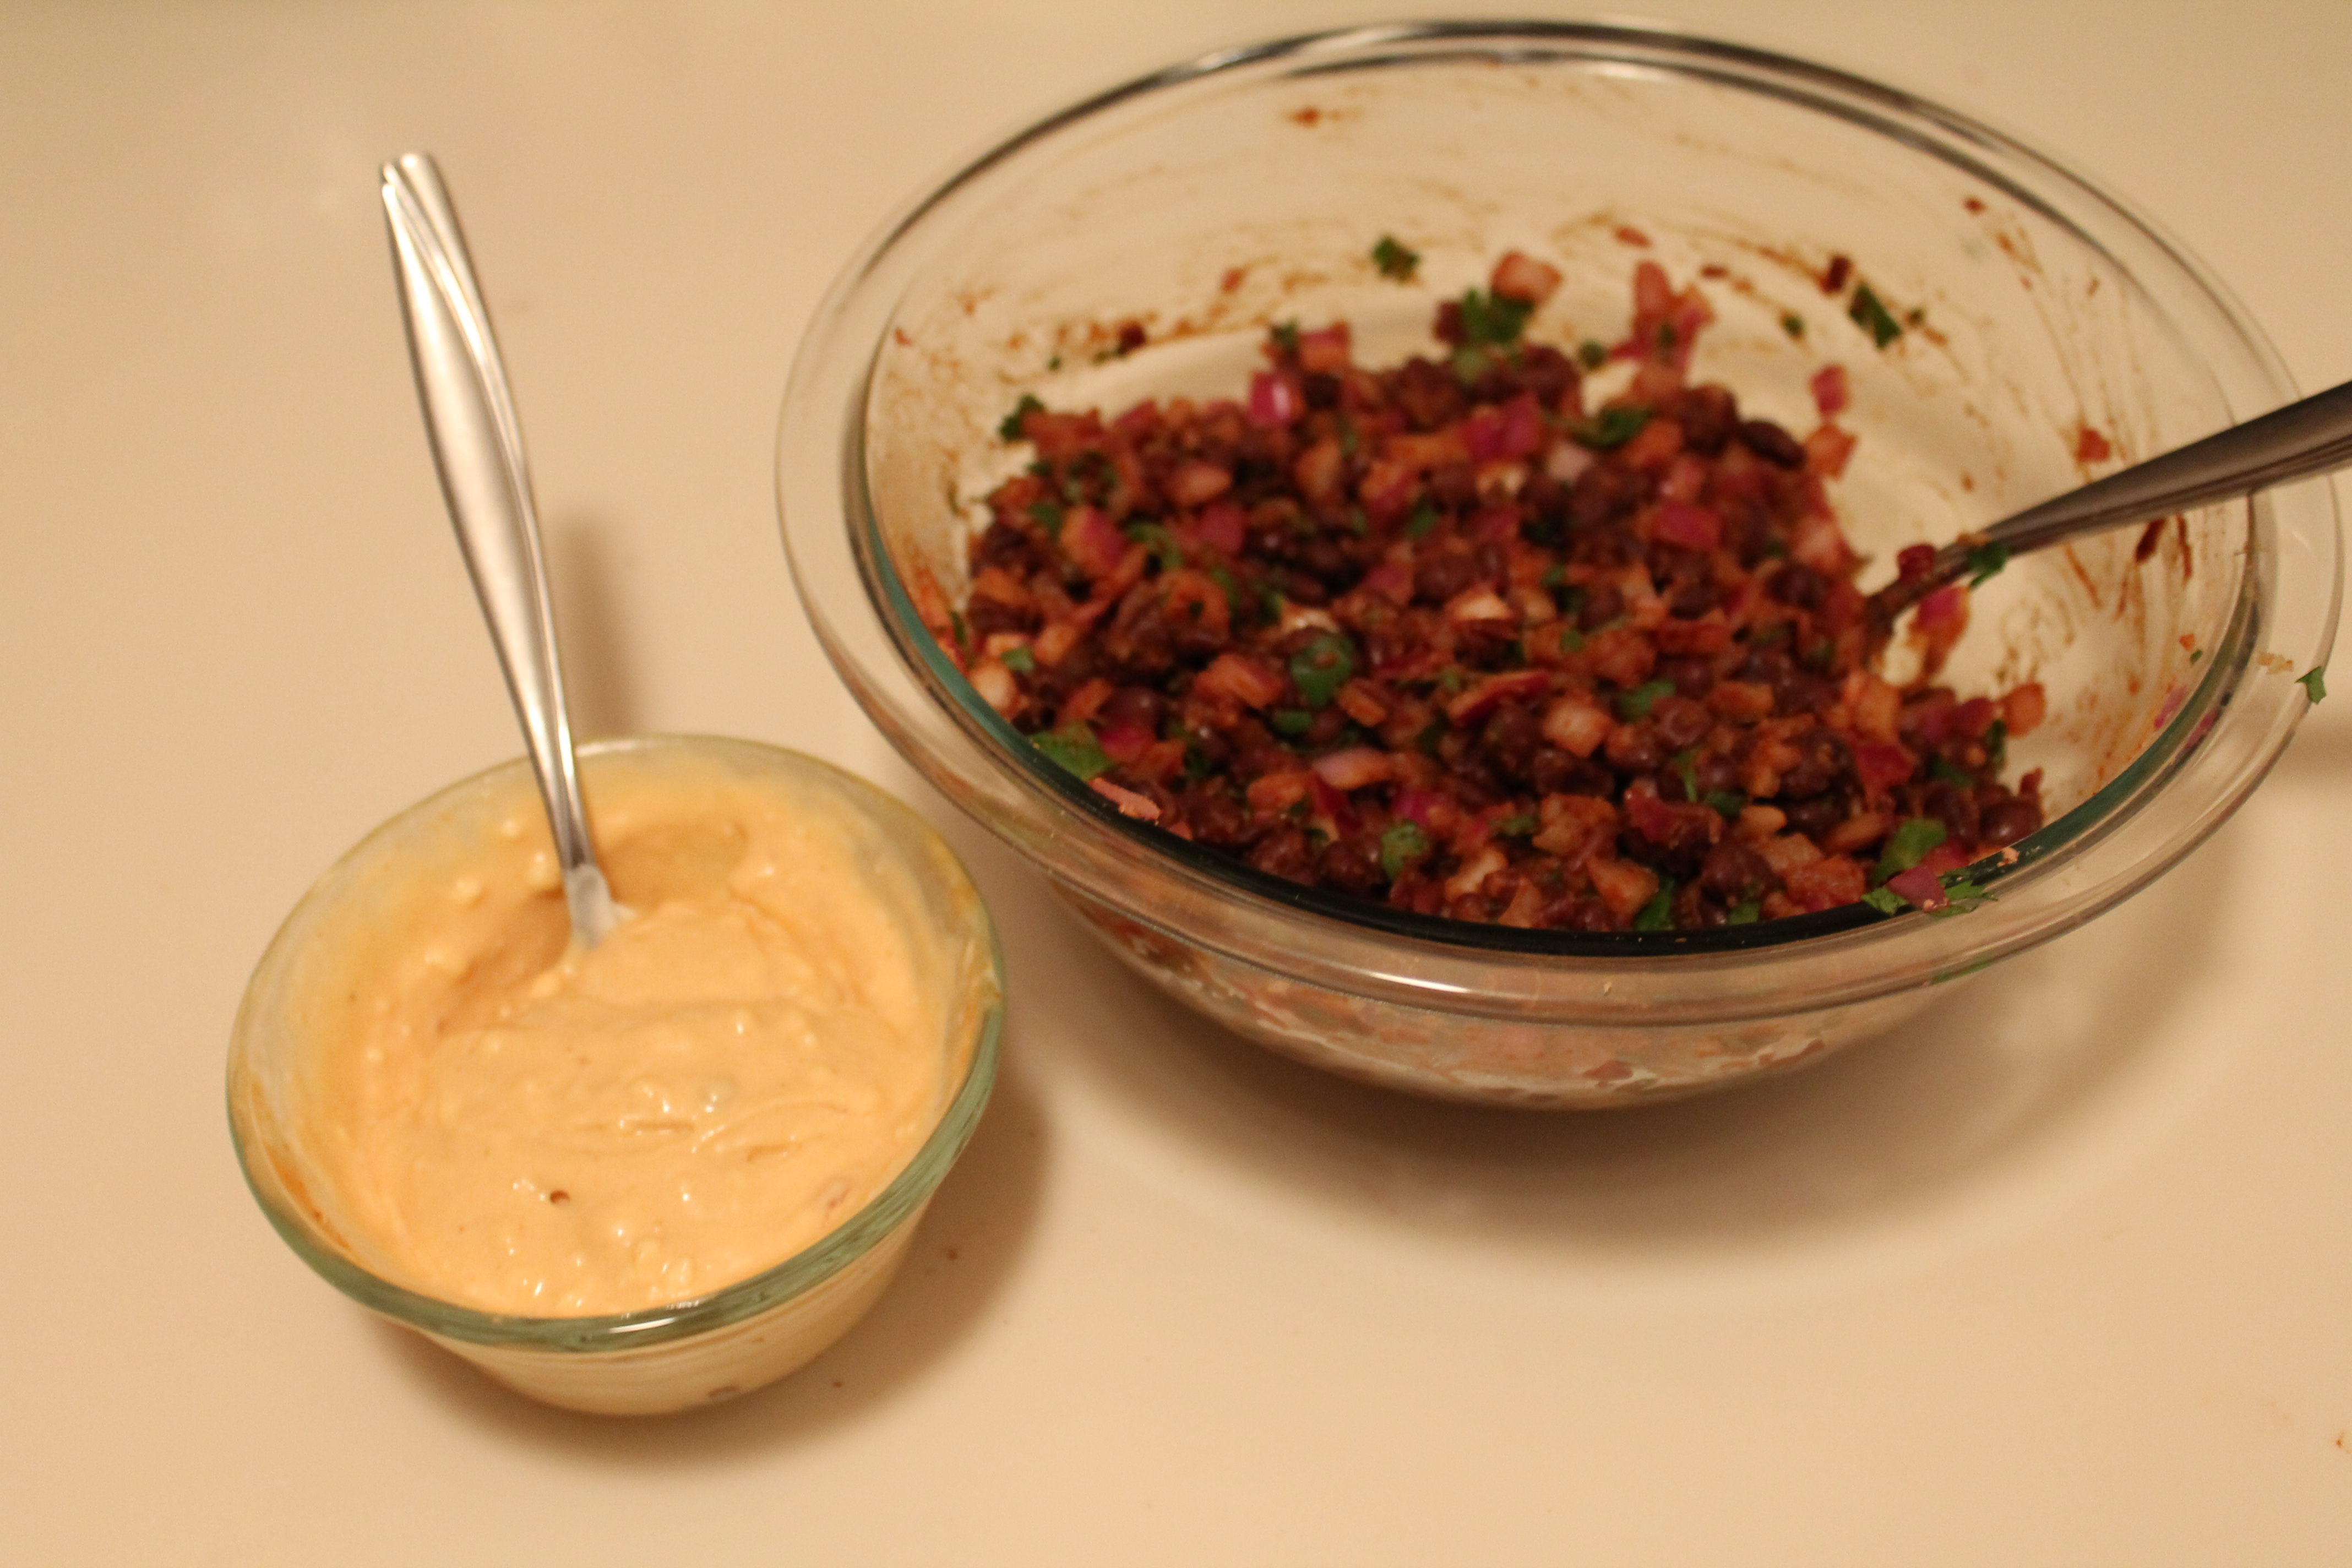 Spicy Black Bean Mash and Chipotle Mayo